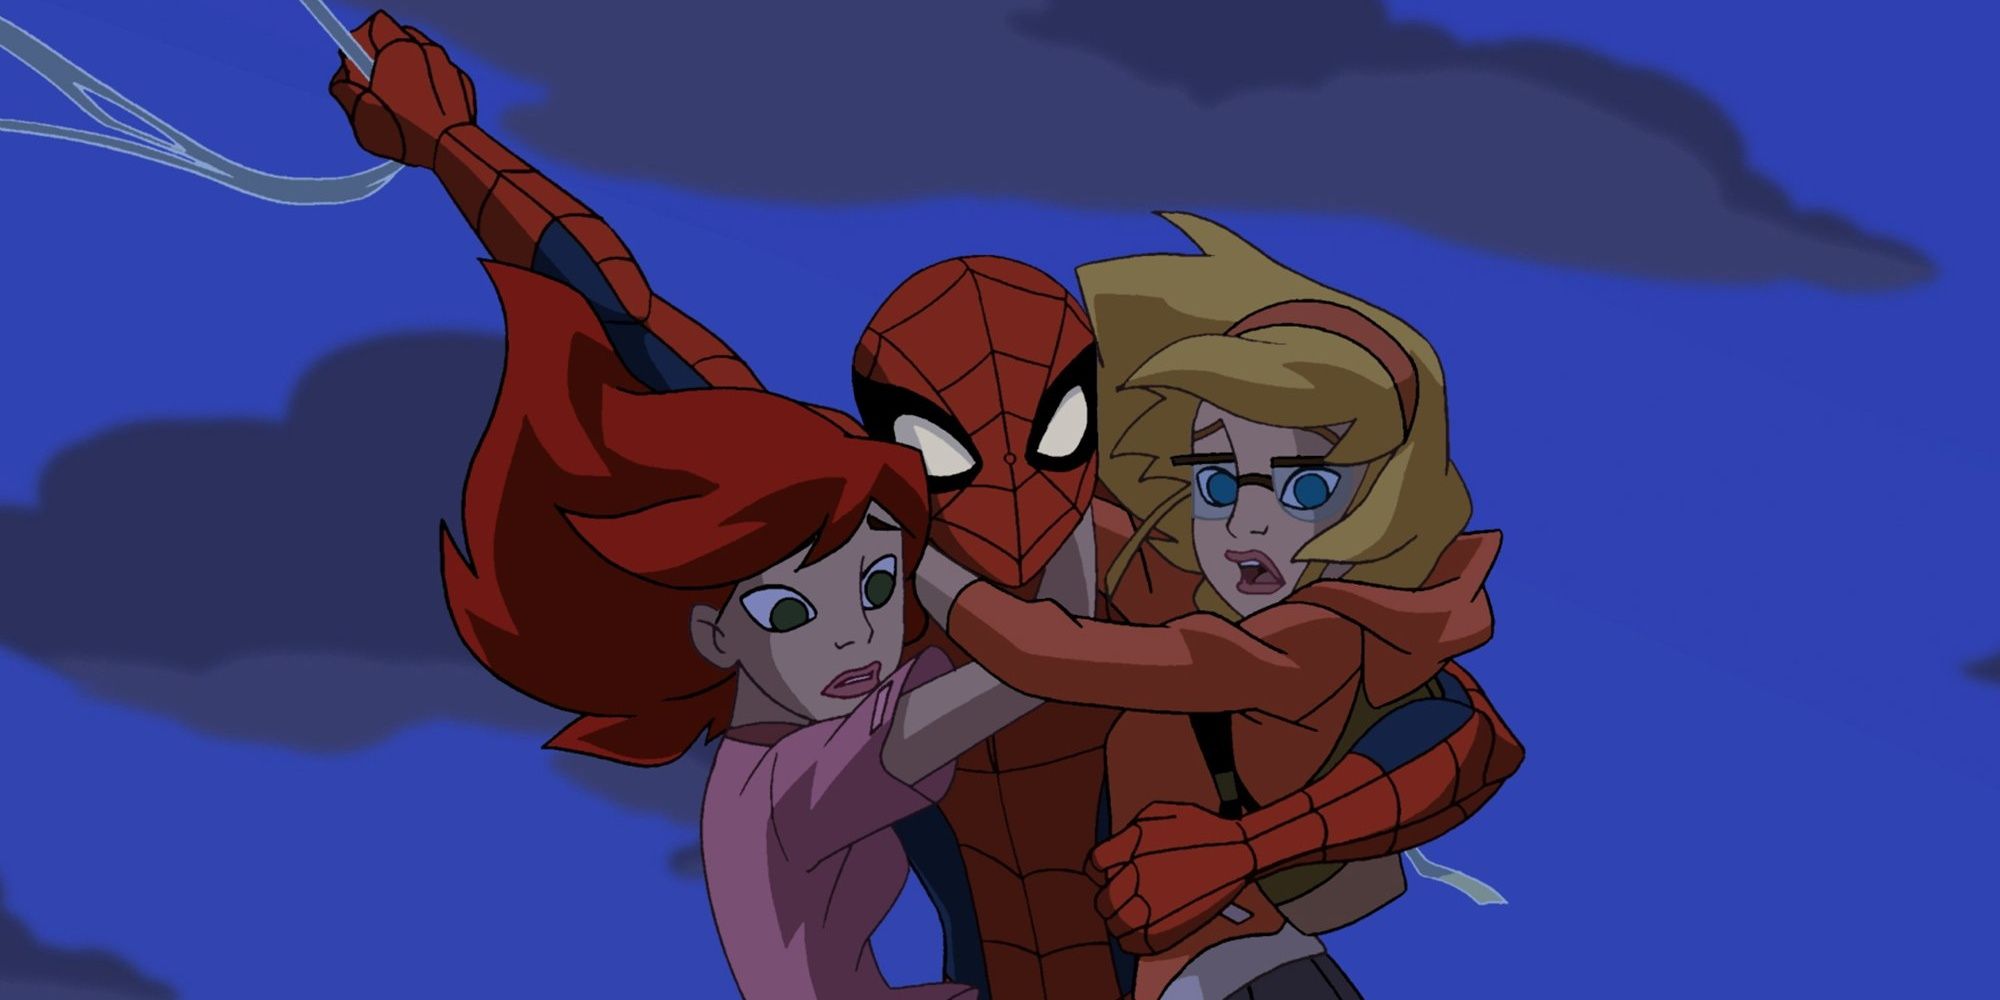 Spider-Man swinging with Mary Jane and Gwen